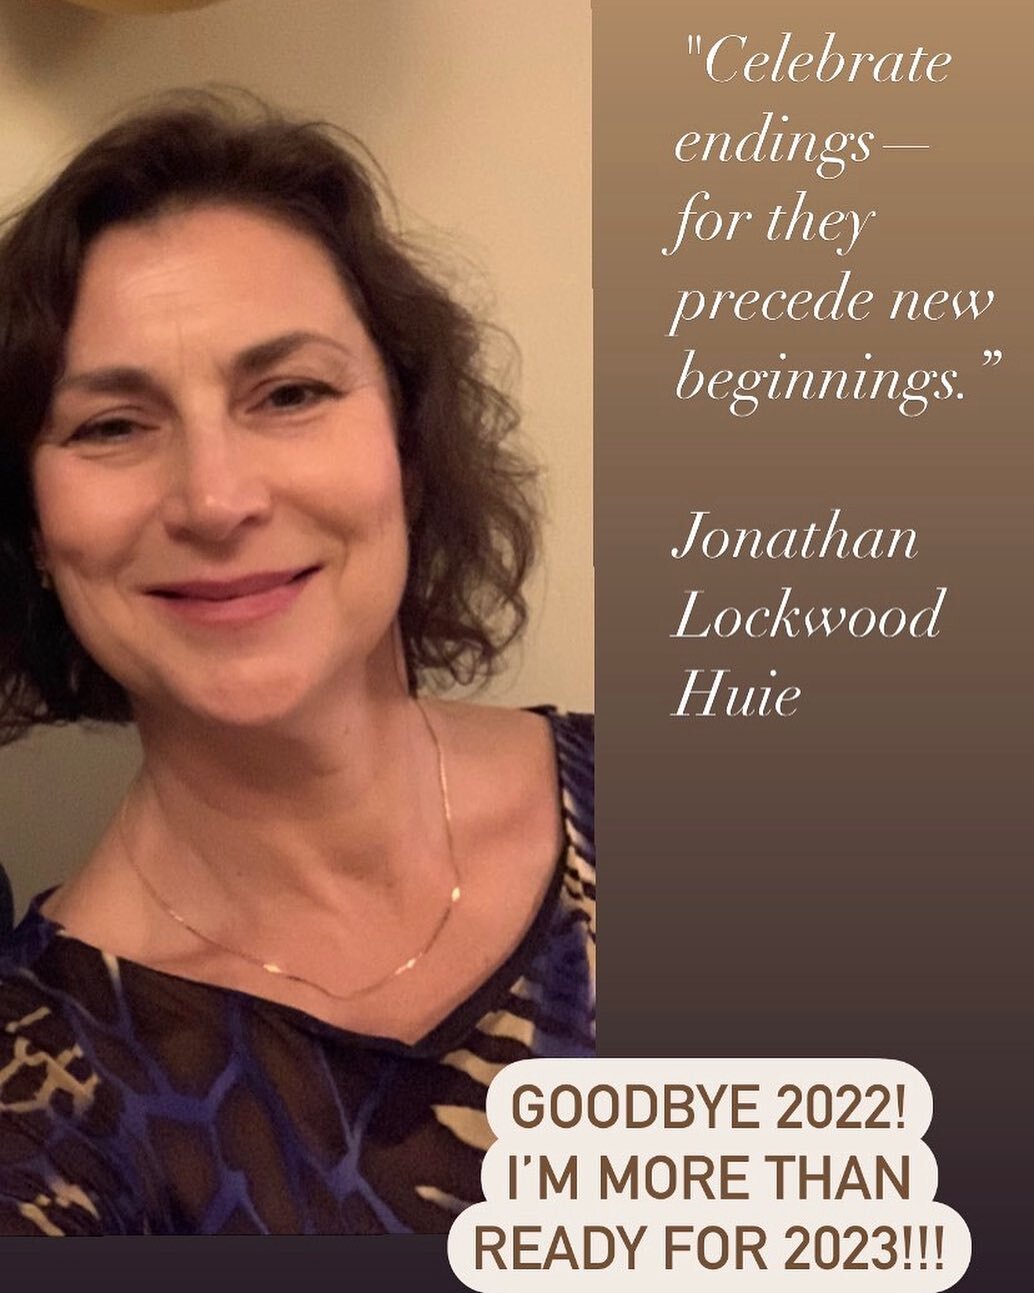 🎉❤️ &quot;Celebrate endings&mdash;for they precede new beginnings.&rdquo; 👏❤️
 
Jonathan Lockwood Huie

Do you look back at your year and do some kind of review? I did it for many years!

Well, I tried this year to do it too&hellip; However, I was 